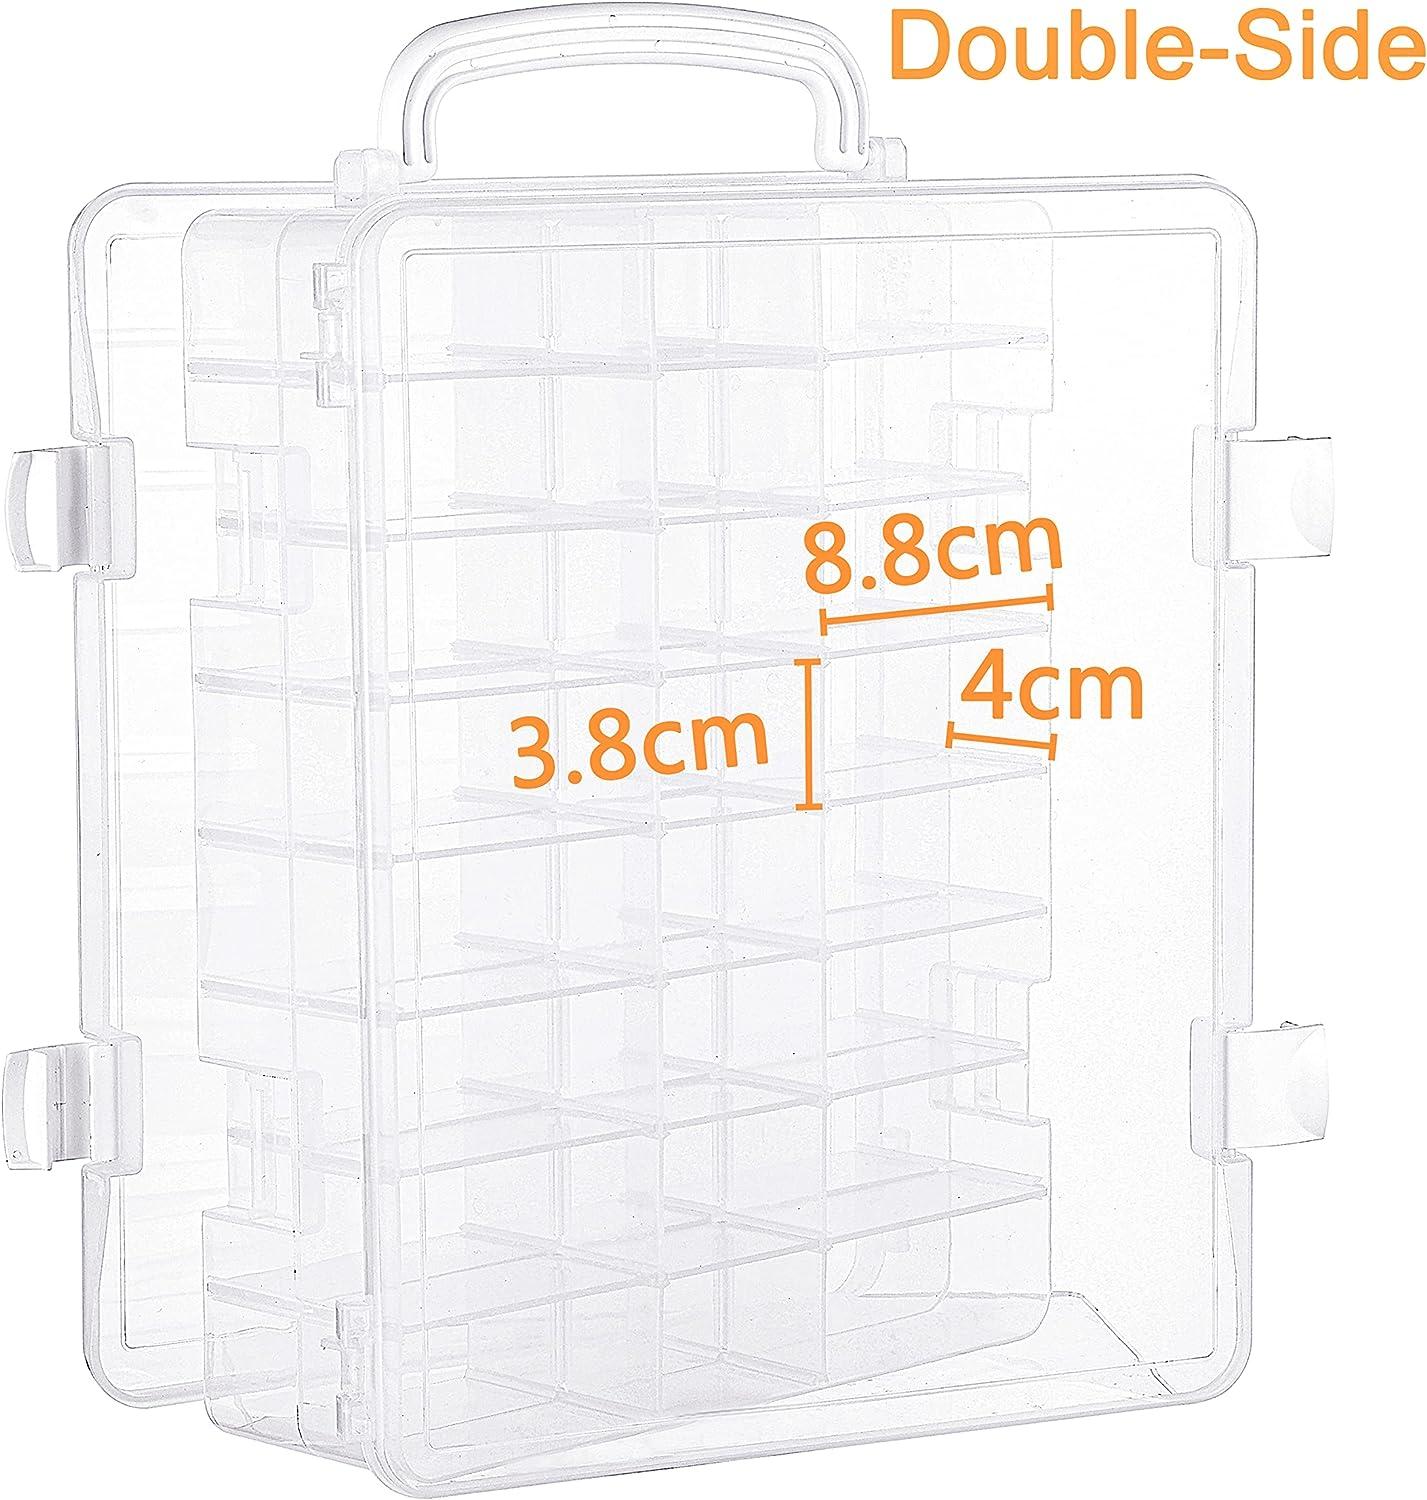 New brothread 3 Layers Stackable Clear Storage Box/Organizer for Holding 60 Spools Home Embroidery & Sewing Thread and Other Embroidery Sewing Cra